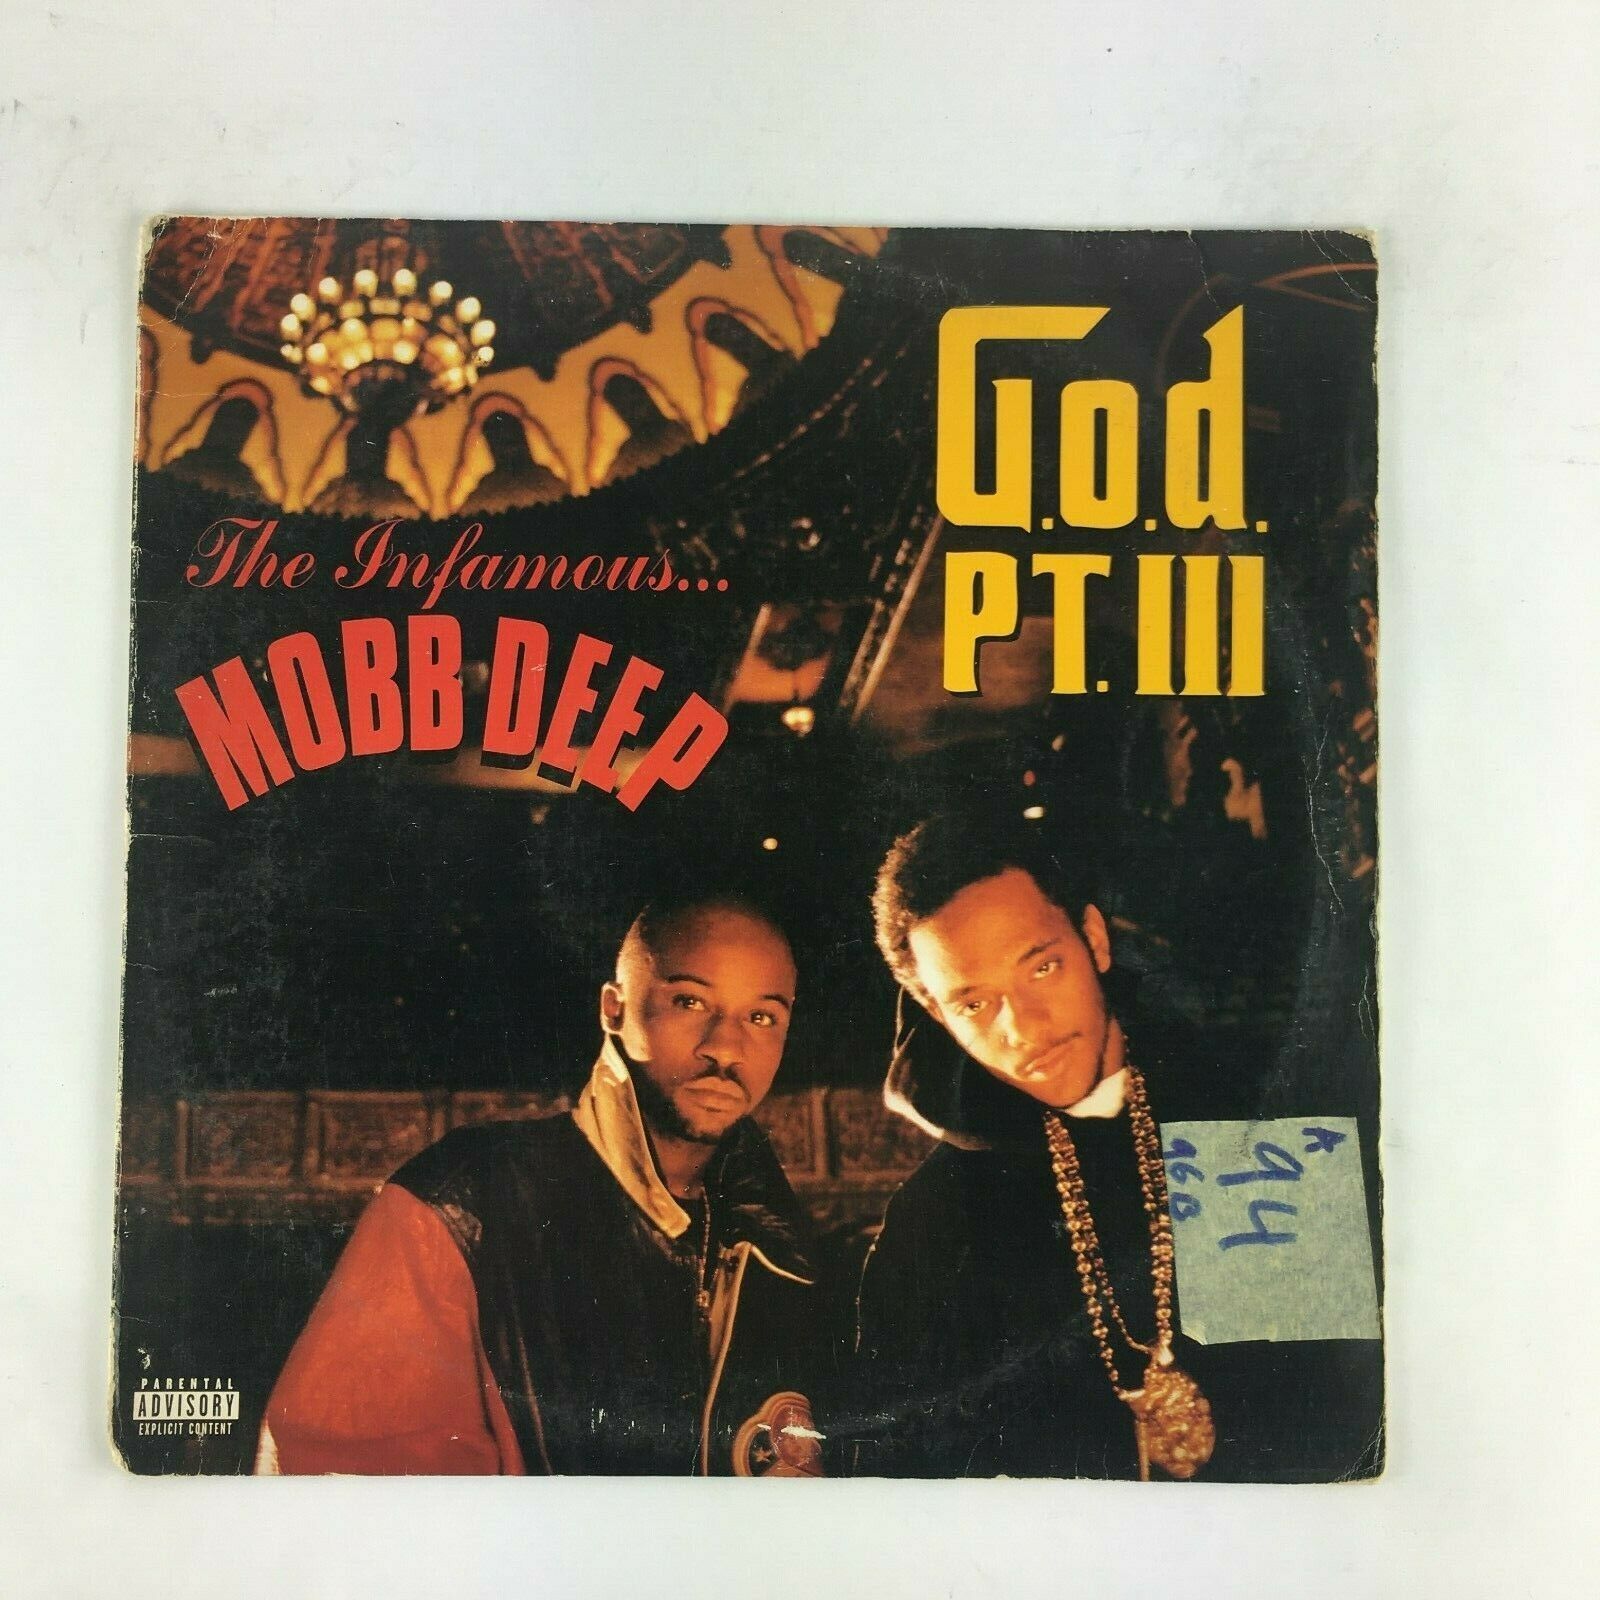 Primary image for The Infamous....MOBBDEEP GOD PT III